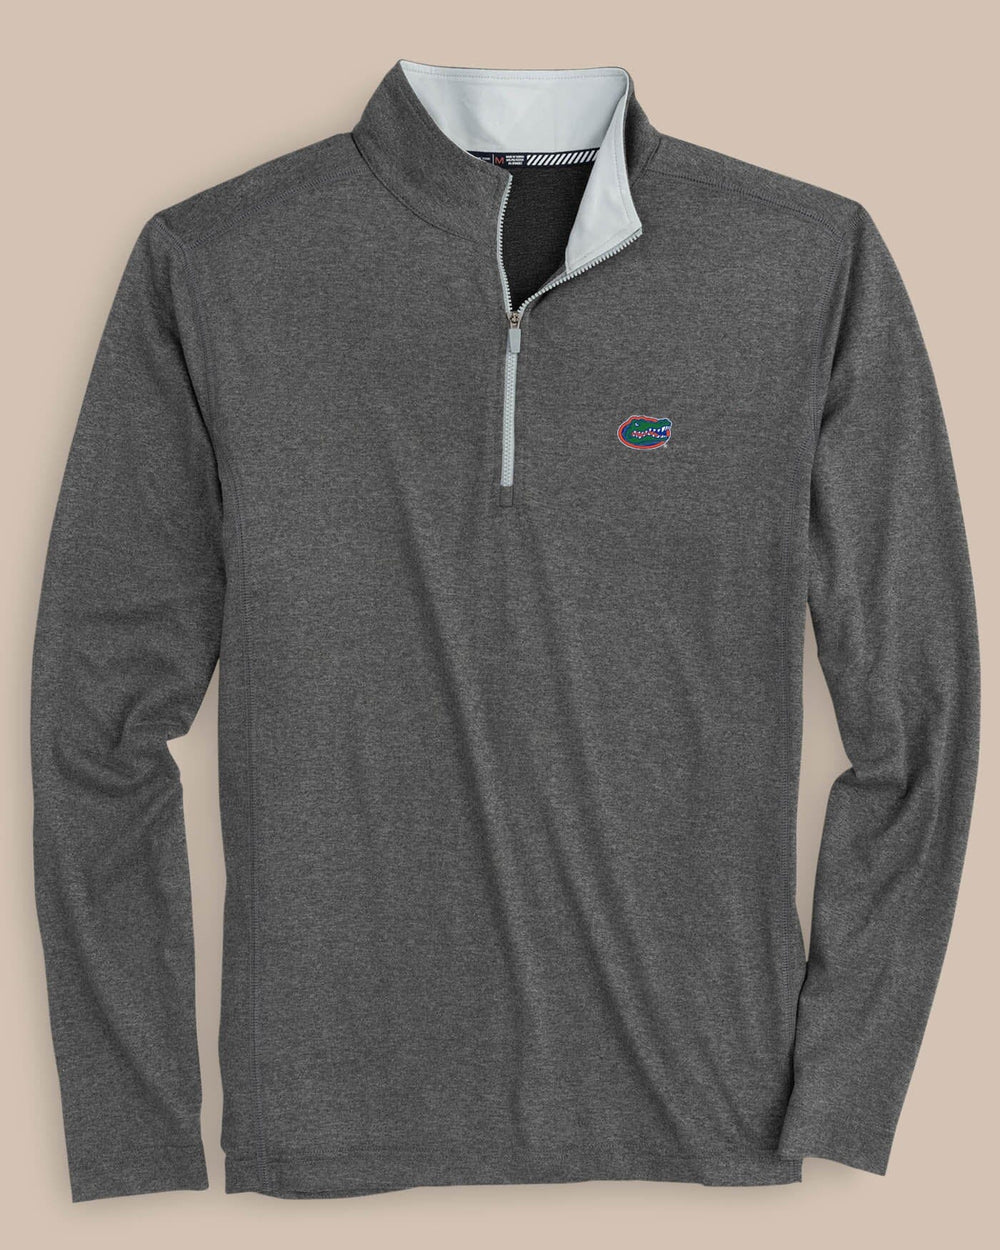 The front view of the Men's University of Florida Flanker Quarter Zip Pullover by Southern Tide - Heather Polarized Grey